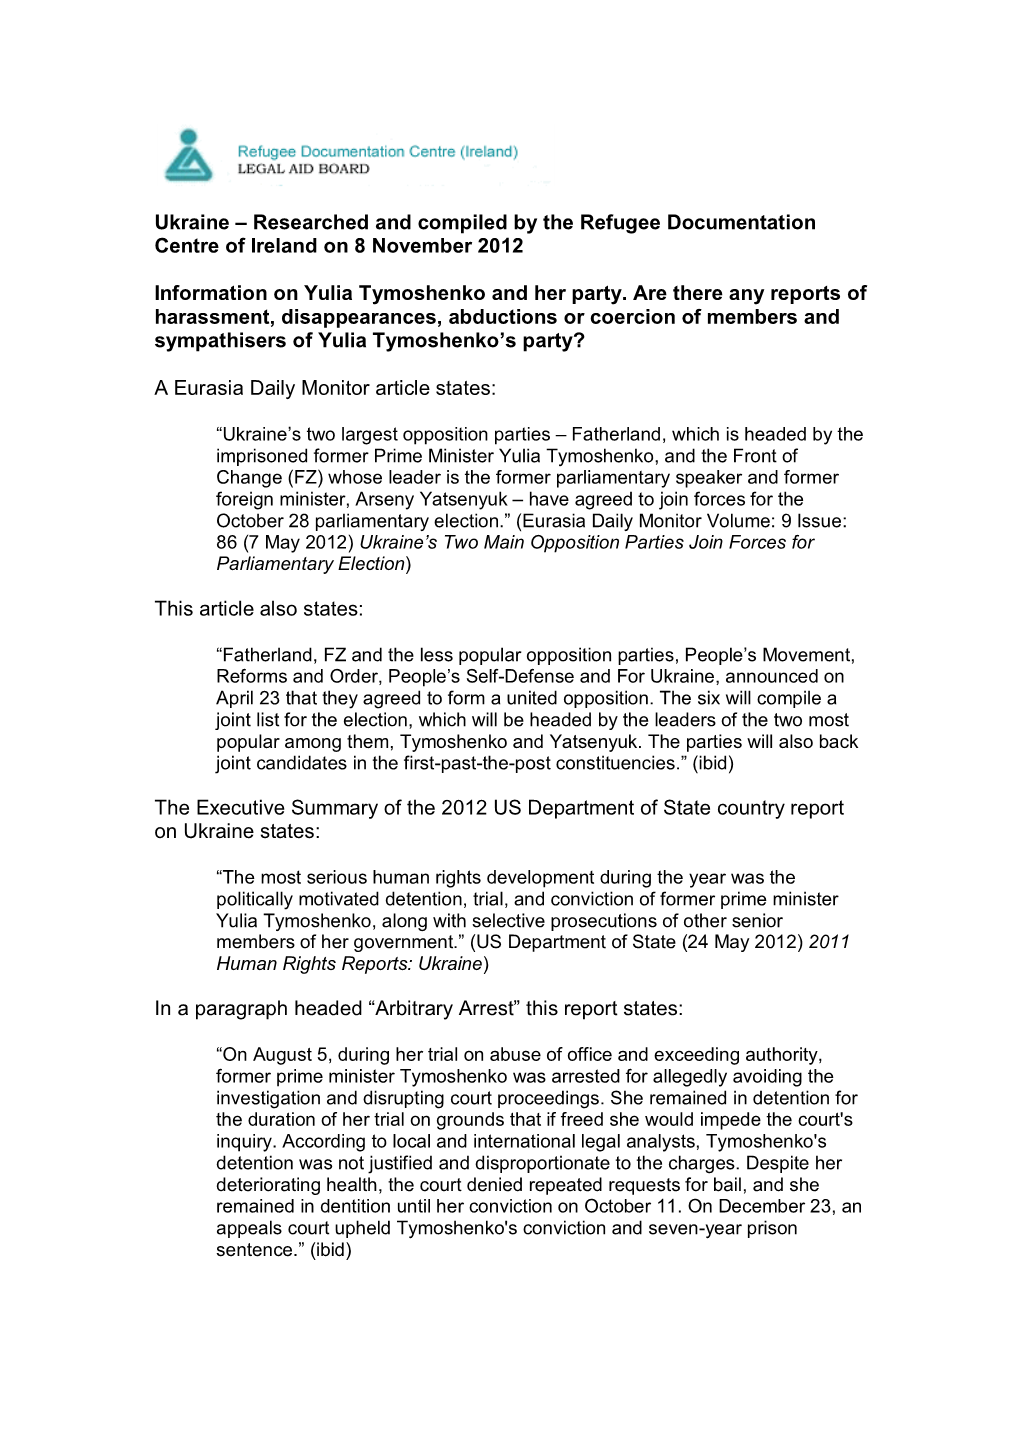 Ukraine – Researched and Compiled by the Refugee Documentation Centre of Ireland on 8 November 2012